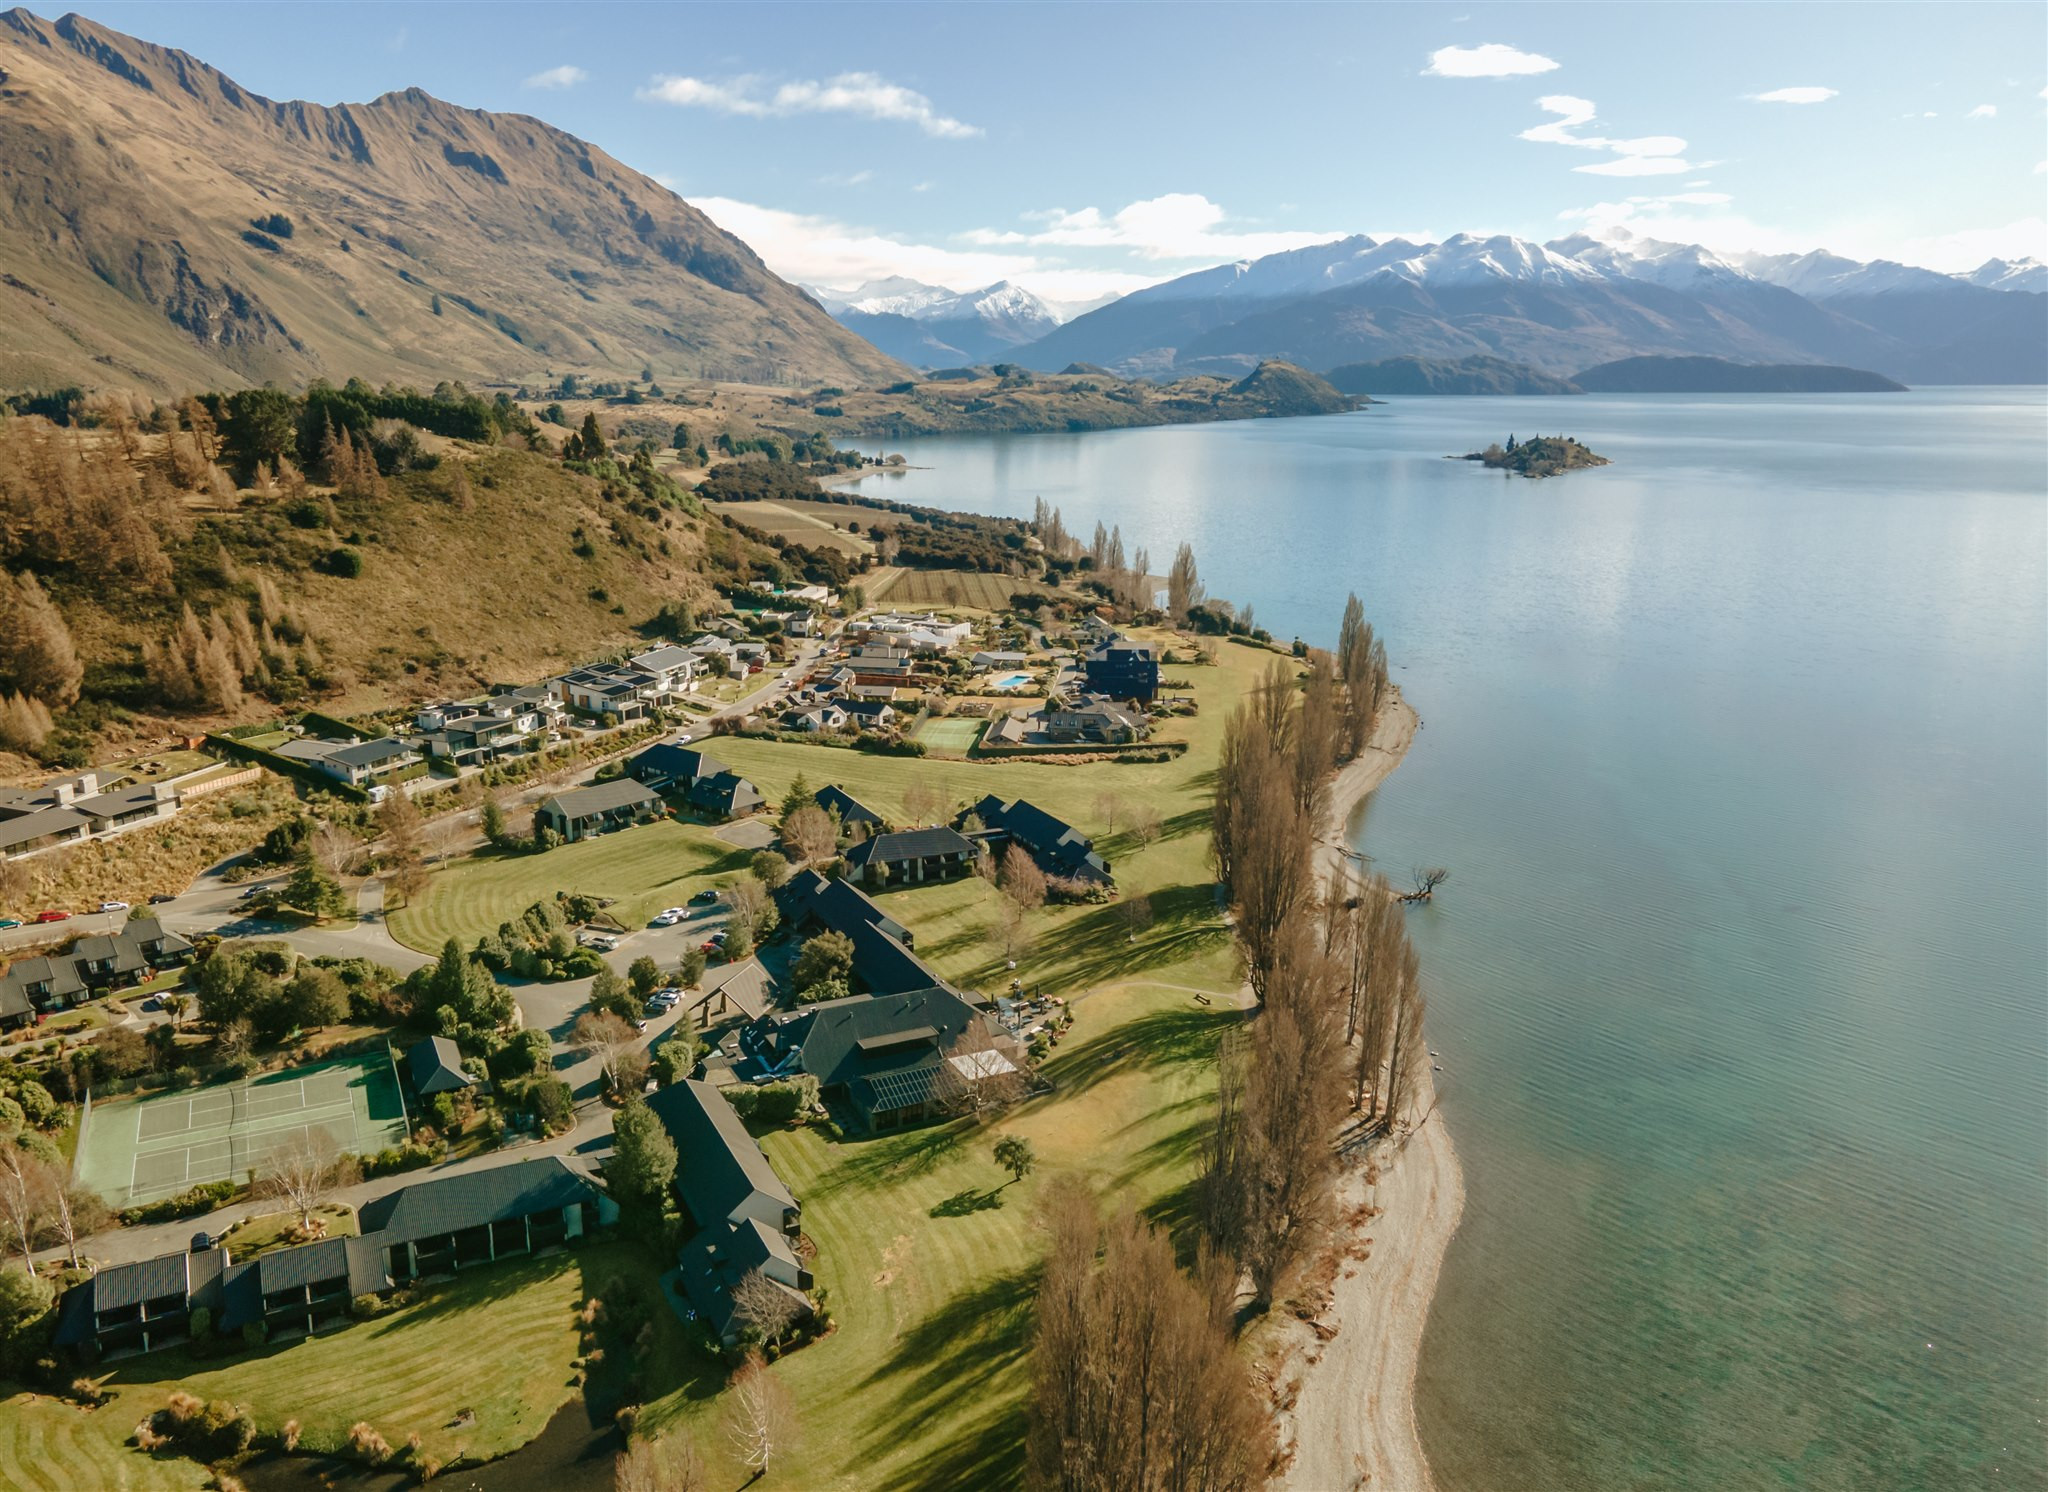 Edgewater Resort is located right on the shores of Lake Wanaka.